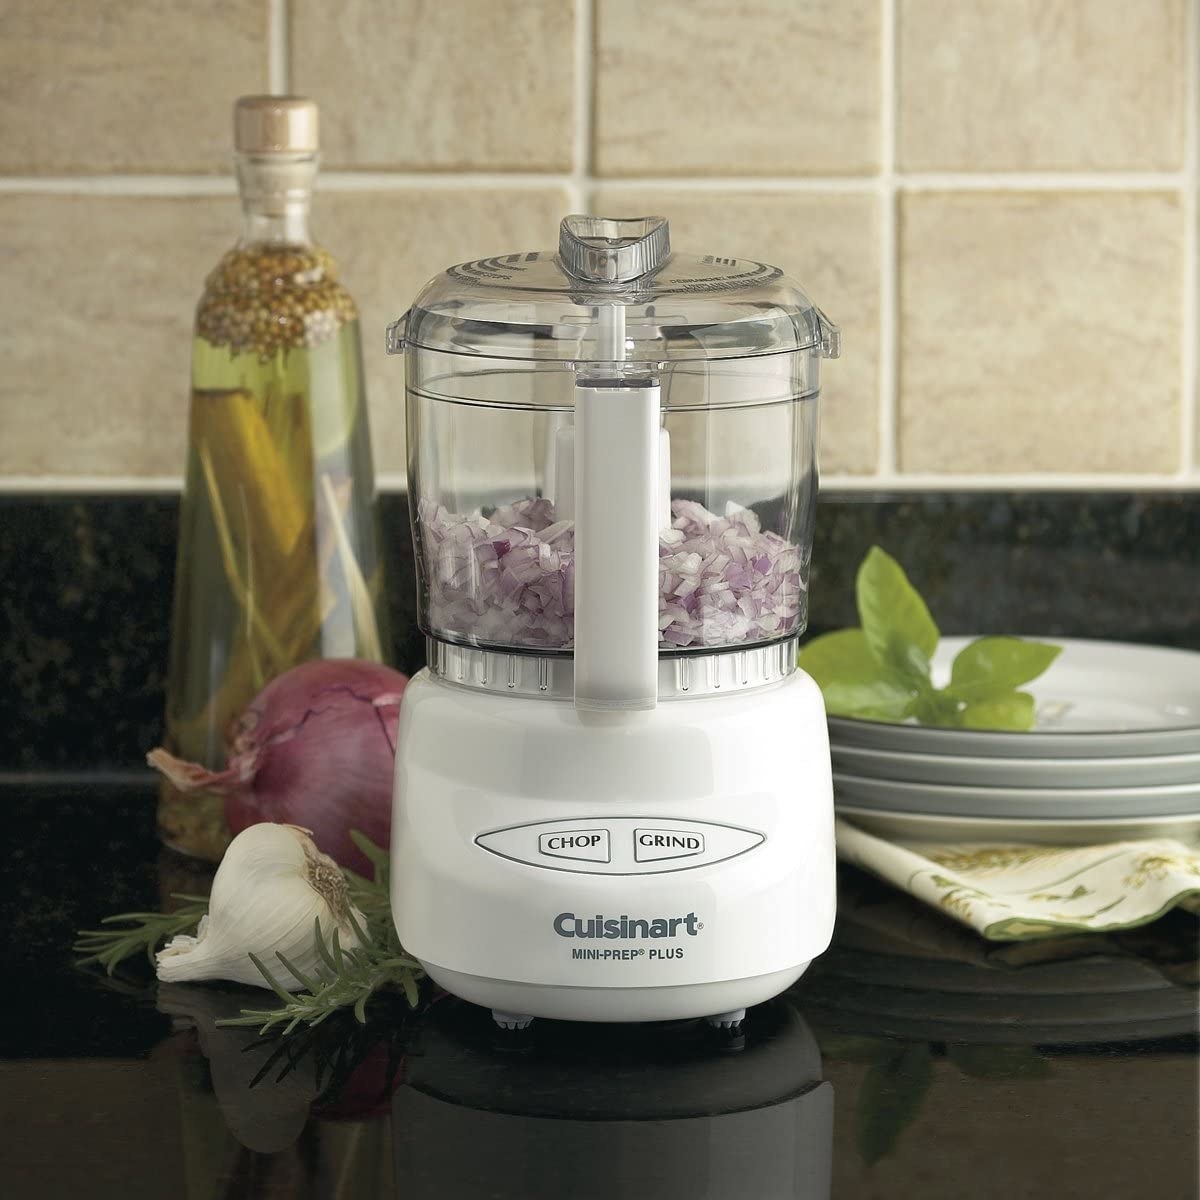 A food processor filled with diced onions